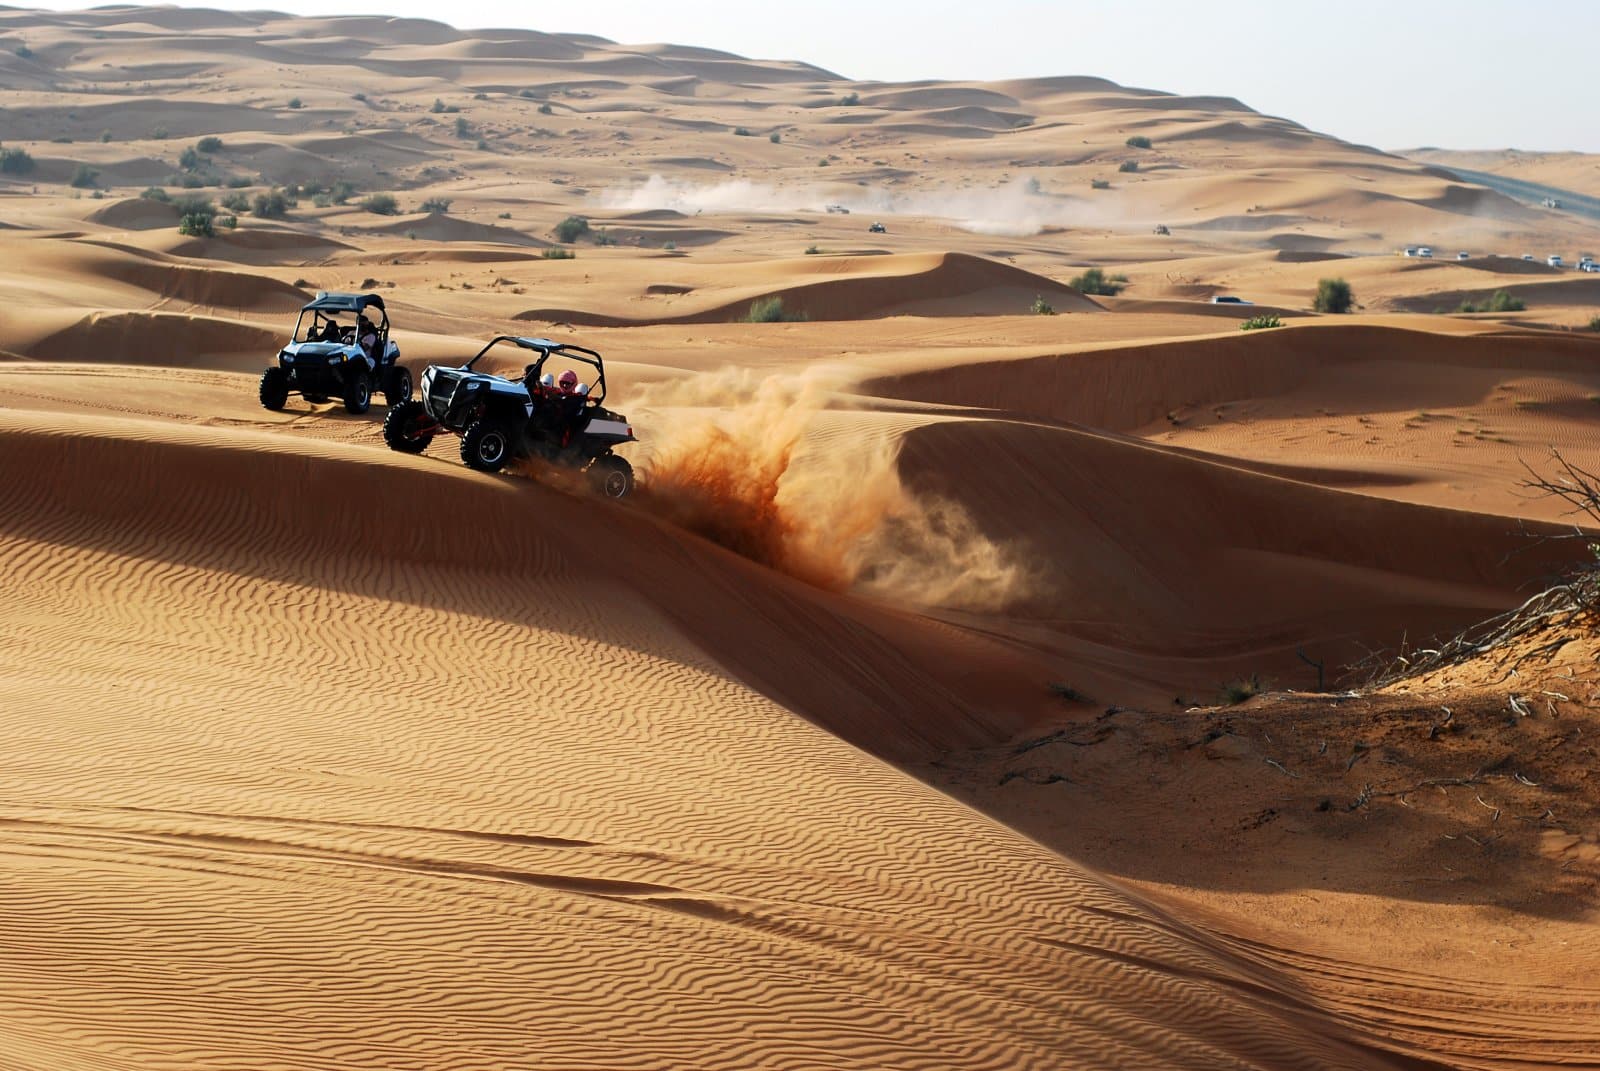 <p><span>An ATV adventure in the Sahara Desert offers a unique and exhilarating experience. The vast expanse of the desert, with its rolling dunes and stark landscapes, provides an ideal backdrop for an unforgettable off-road adventure.</span></p> <p><span>Riding through the Sahara, you’ll experience the desert’s serene beauty and might even encounter nomadic tribes, adding a cultural element to your adventure.</span></p> <p><b>Insider’s Tip: </b><span>Plan your ATV adventure as part of a larger Sahara desert tour, which can include camping under the stars and camel treks.</span></p> <p><b>When To Travel: </b><span>Visit during the cooler months from October to April for the most comfortable desert experience.</span></p> <p><b>How To Get There: </b><span>Fly into Marrakech or Ouarzazate, and then take a drive to the edge of the Sahara Desert.</span></p>